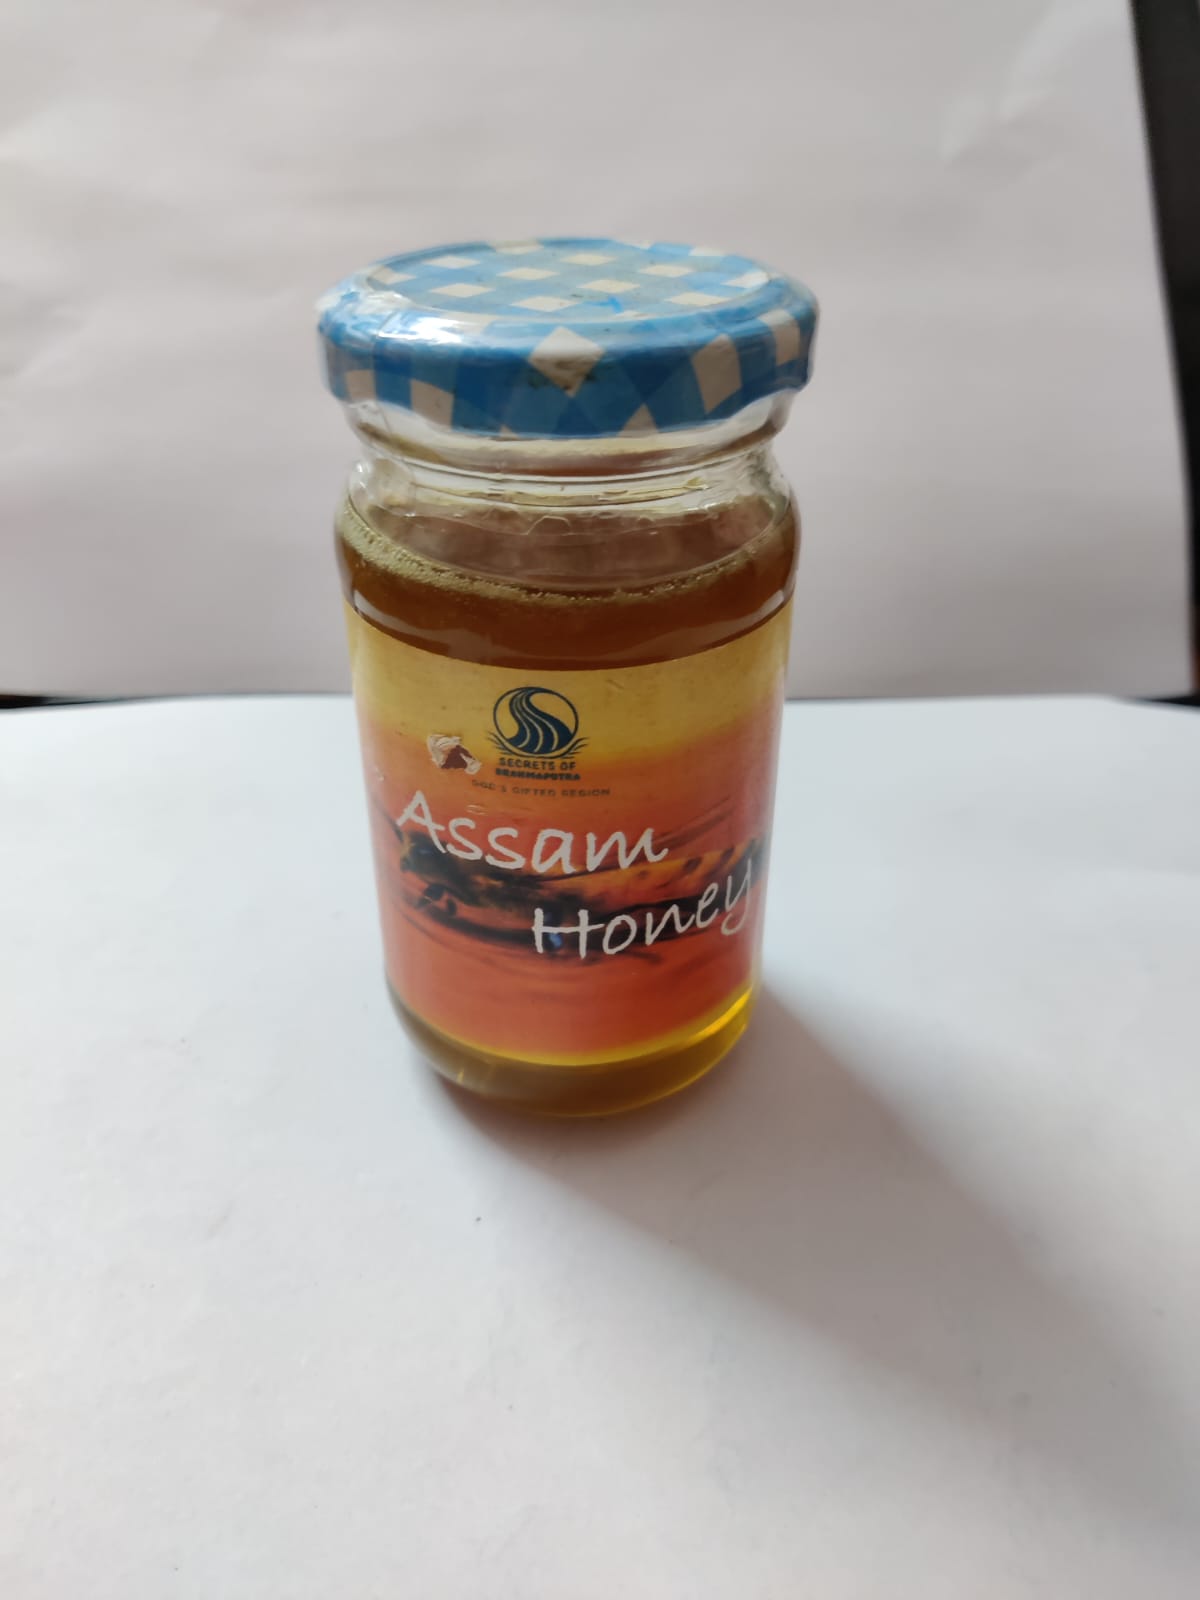 Image of Assam honey are is rich in antioxidants, improves cholesterol, reduces triglyceride levels. It heals burns and wounds when applied externally.  Secrets of Brahmaputra sells natural, organic and healthy food that includes organic rice, spices, pickles, teas, bamboo products and other natural items from the North East of India. 